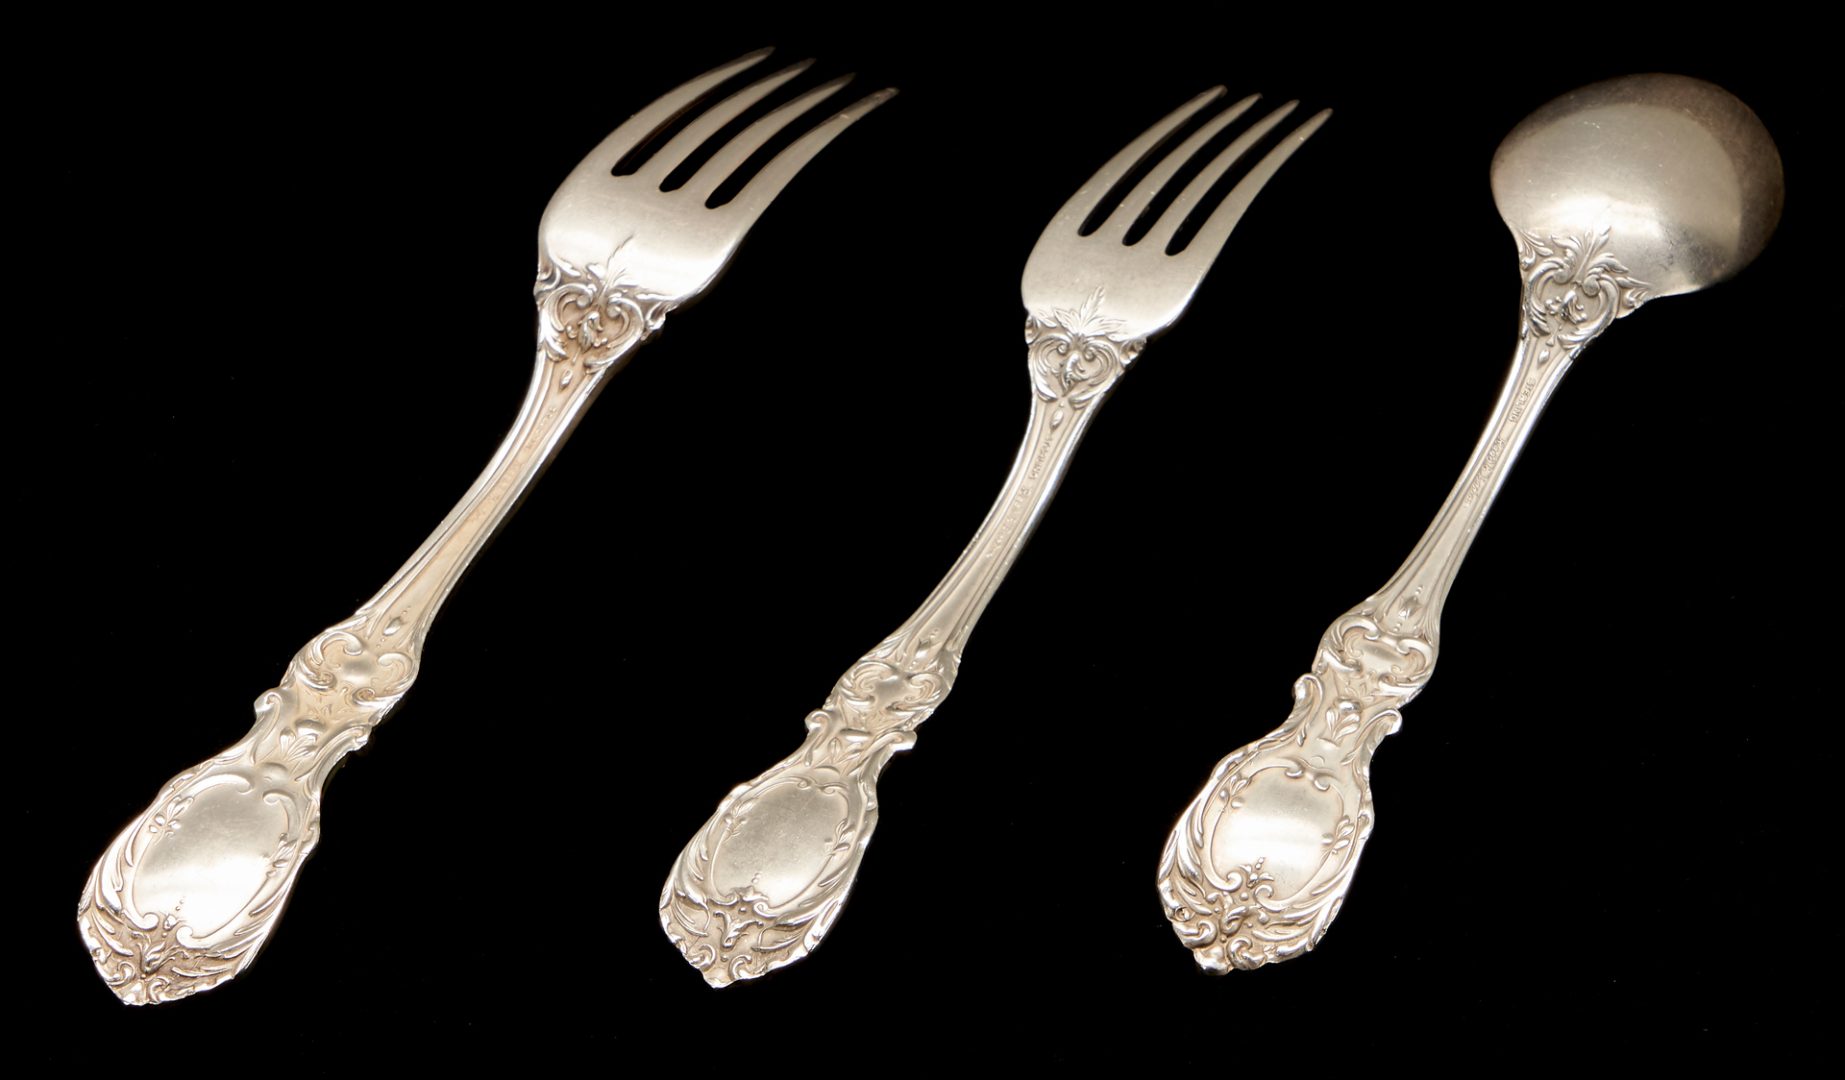 Lot 822: 21 pcs Francis I Sterling Silver Flatware by Reed & Barton